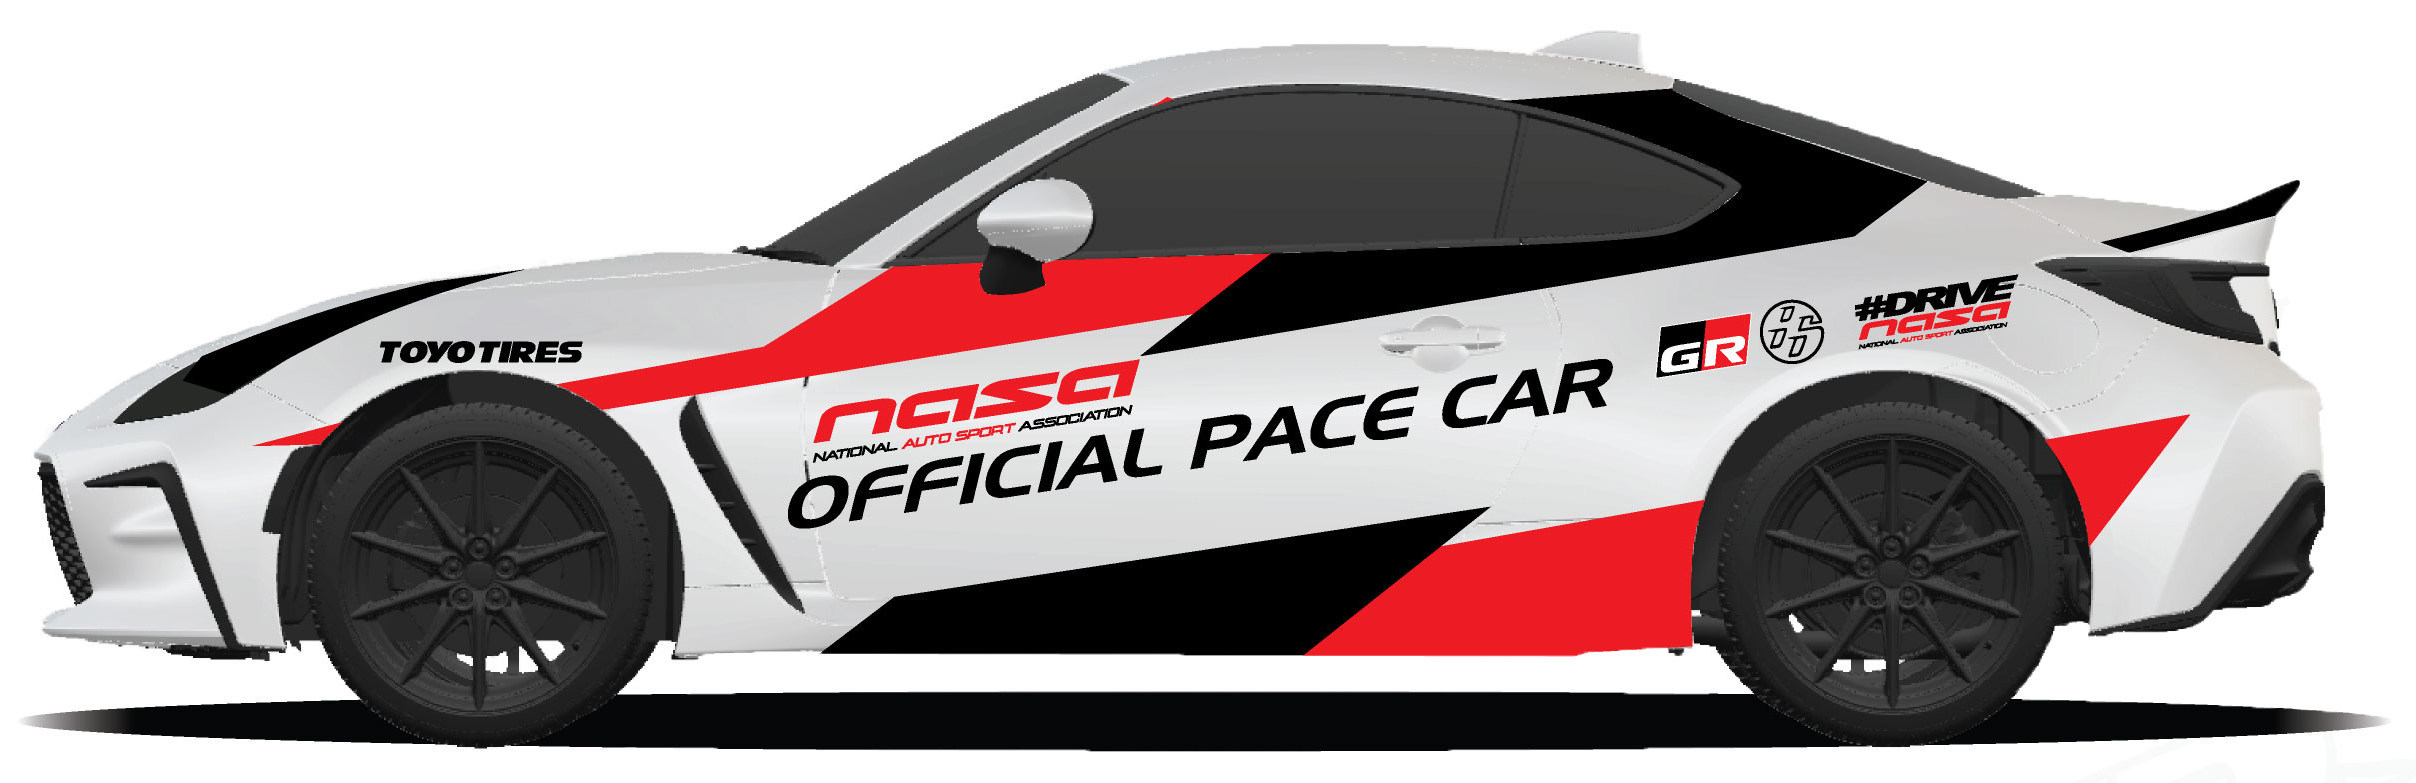 2022 Toyota GR 86: The official pace car for the National Auto Sport Association Championship Races in Daytona.